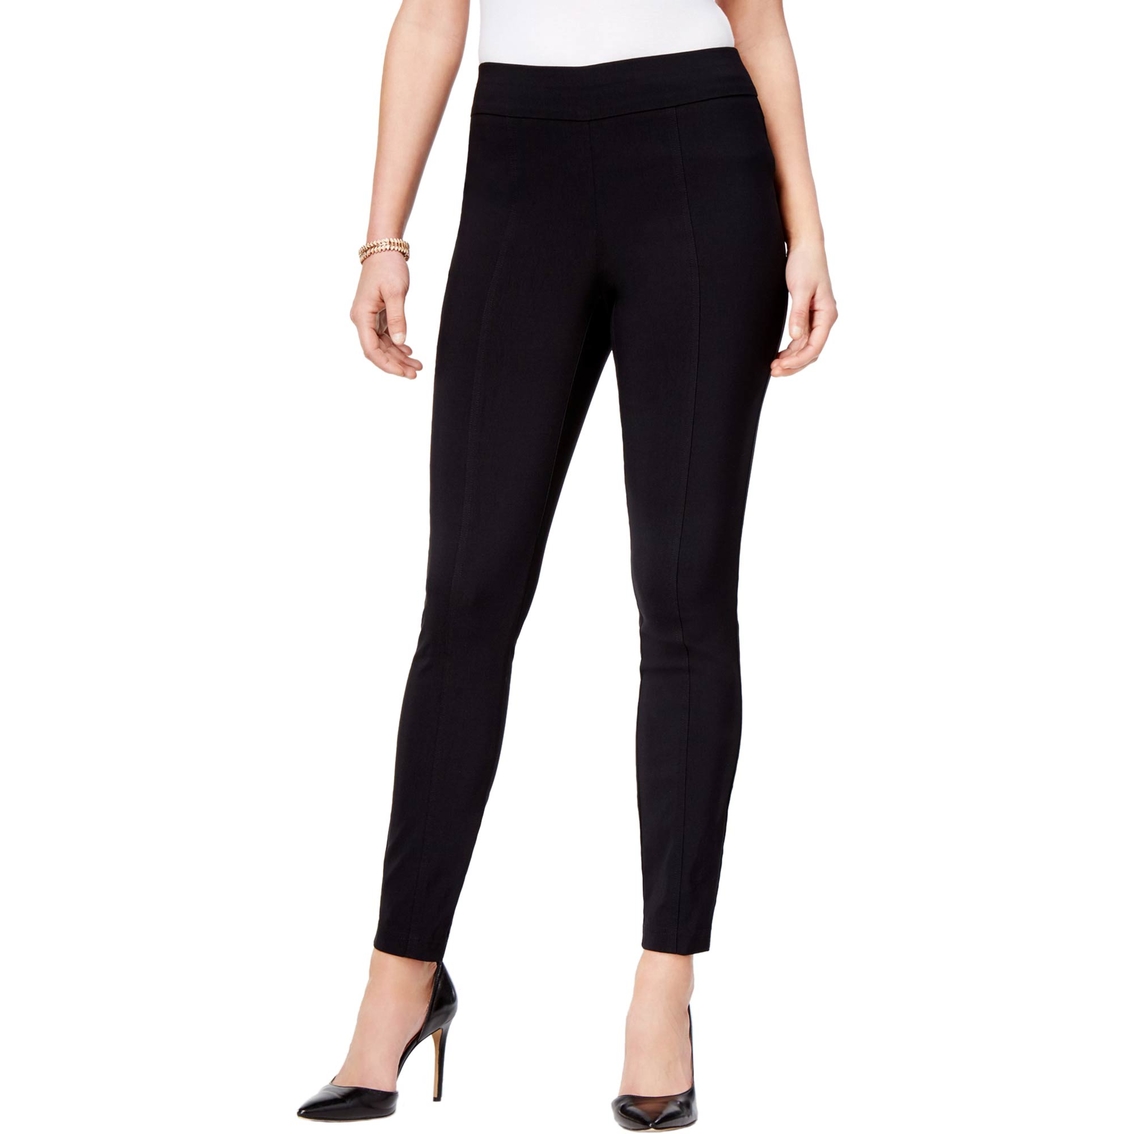 Style & Co. Ponte Knit Seamed Skinny Pants, Pants, Clothing & Accessories